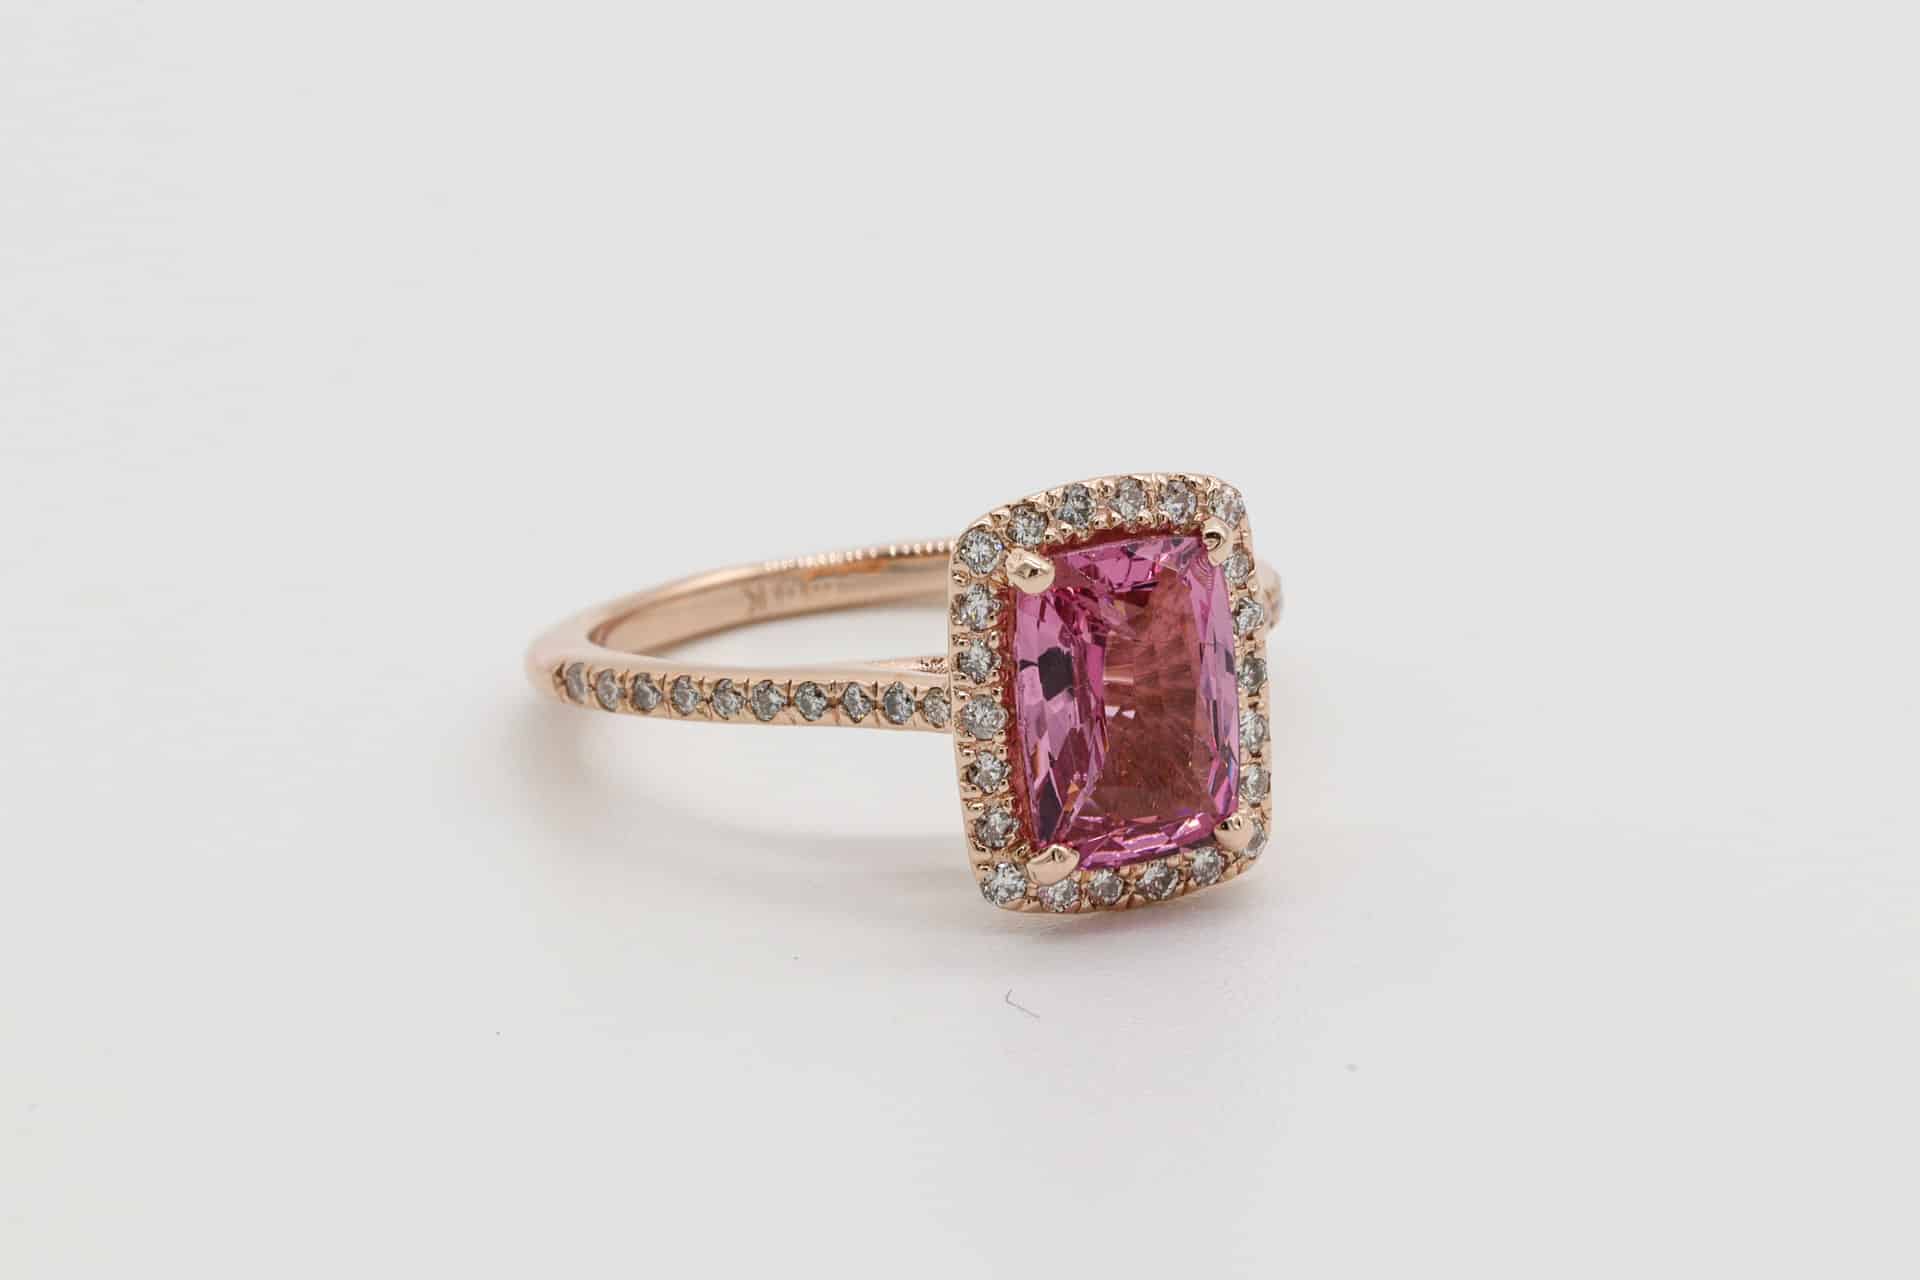 Why She Would Love An Argyle Pink Diamond Engagement Ring